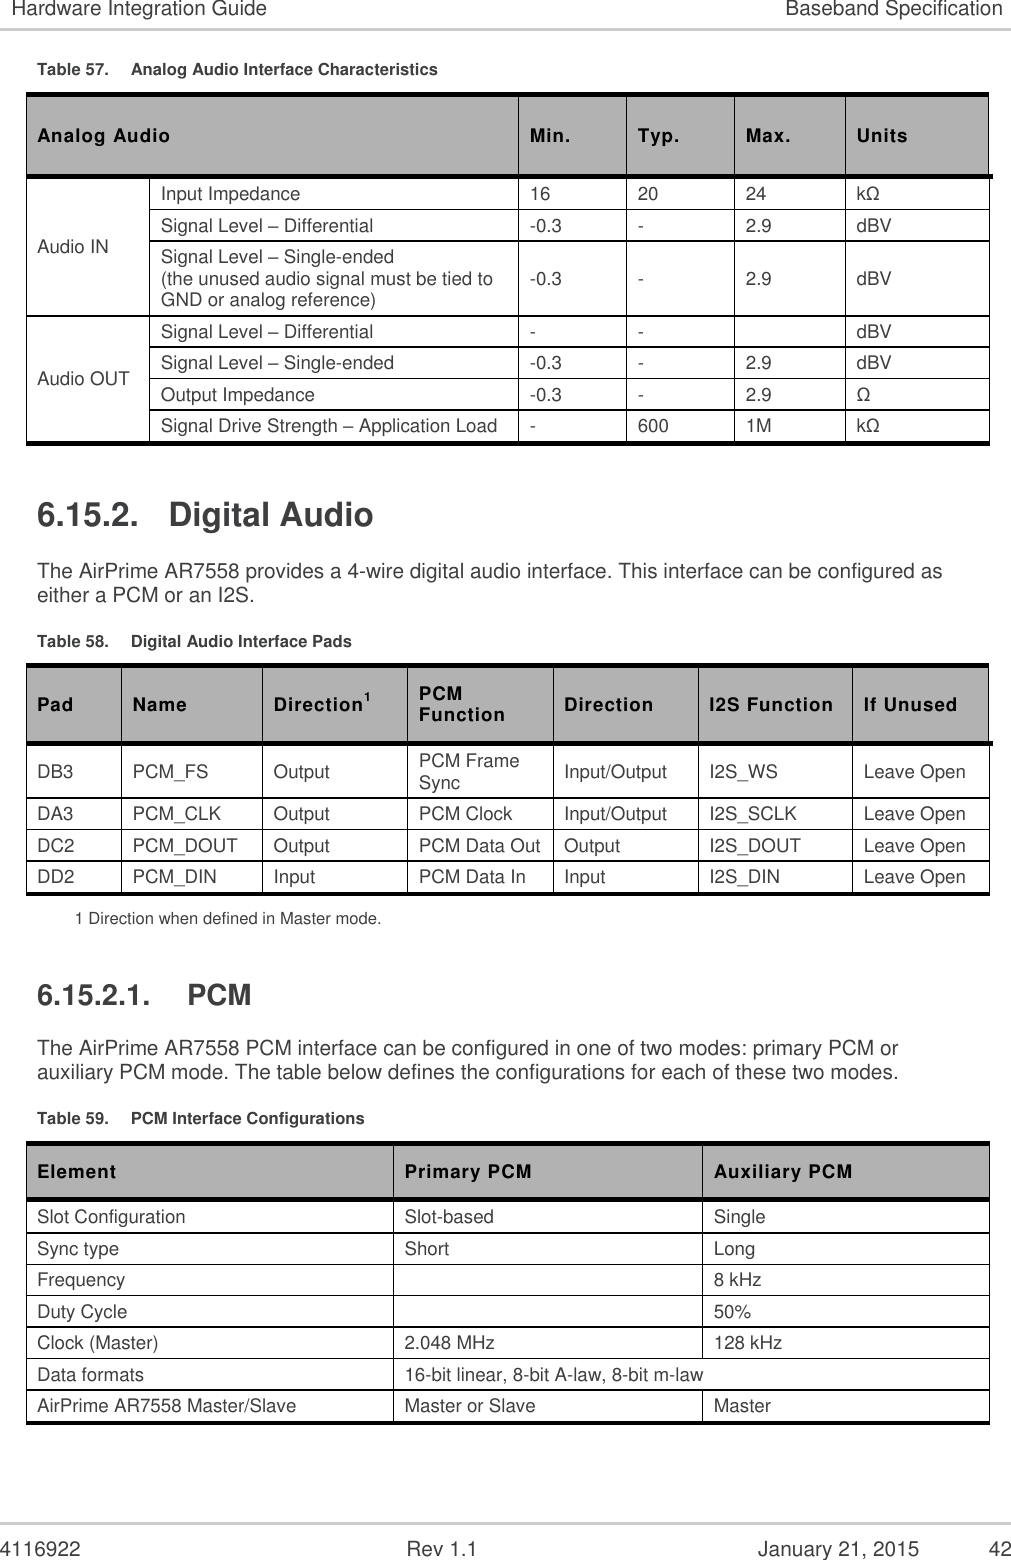   4116922              Rev 1.1          January 21, 2015  42 Hardware Integration Guide Baseband Specification Table 57.  Analog Audio Interface Characteristics Analog Audio Min. Typ. Max. Units Audio IN Input Impedance 16 20 24 kΩ Signal Level – Differential -0.3 - 2.9 dBV Signal Level – Single-ended (the unused audio signal must be tied to GND or analog reference) -0.3 - 2.9 dBV Audio OUT Signal Level – Differential - -  dBV Signal Level – Single-ended -0.3 - 2.9 dBV Output Impedance -0.3 - 2.9 Ω Signal Drive Strength – Application Load - 600 1M kΩ 6.15.2.  Digital Audio The AirPrime AR7558 provides a 4-wire digital audio interface. This interface can be configured as either a PCM or an I2S. Table 58.  Digital Audio Interface Pads Pad Name Direction1 PCM Function Direction I2S Function If Unused DB3 PCM_FS Output PCM Frame Sync Input/Output I2S_WS Leave Open DA3 PCM_CLK Output PCM Clock Input/Output I2S_SCLK Leave Open DC2 PCM_DOUT Output PCM Data Out Output I2S_DOUT Leave Open DD2 PCM_DIN Input PCM Data In Input I2S_DIN Leave Open 1 Direction when defined in Master mode. 6.15.2.1.  PCM The AirPrime AR7558 PCM interface can be configured in one of two modes: primary PCM or auxiliary PCM mode. The table below defines the configurations for each of these two modes. Table 59.  PCM Interface Configurations Element Primary PCM Auxiliary PCM Slot Configuration Slot-based Single Sync type Short Long Frequency  8 kHz Duty Cycle  50% Clock (Master) 2.048 MHz 128 kHz Data formats 16-bit linear, 8-bit A-law, 8-bit m-law AirPrime AR7558 Master/Slave Master or Slave Master 